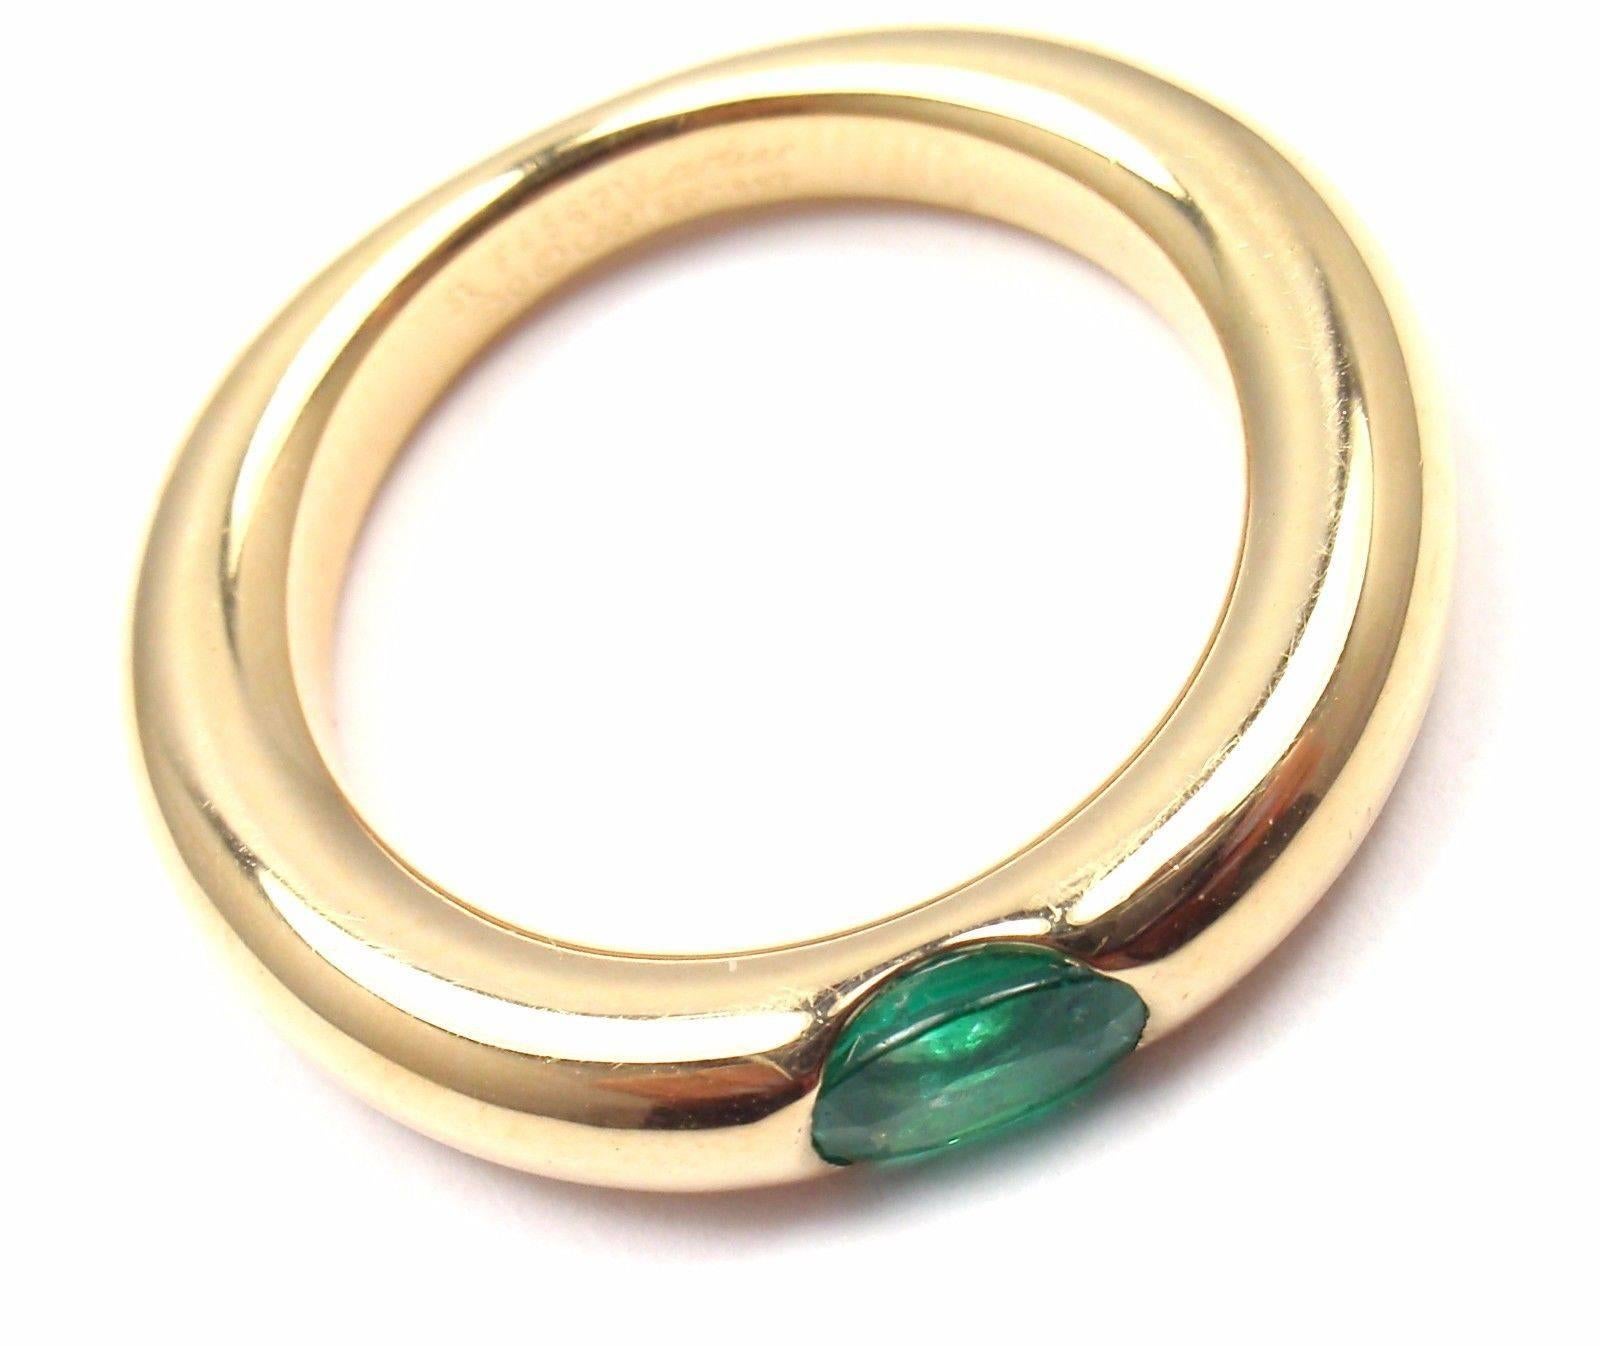 18k Yellow Gold Ellipse Emerald Band Ring by Cartier.
With 1 oval-shaped beautiful emerald 5mm x 4mm.
This ring comes with Cartier certificate.

Details:
Width: 4mm
Weight: 8.7 grams
Ring Size: European 51 US 5 3/4
Stamped Hallmarks: Cartier 51 750